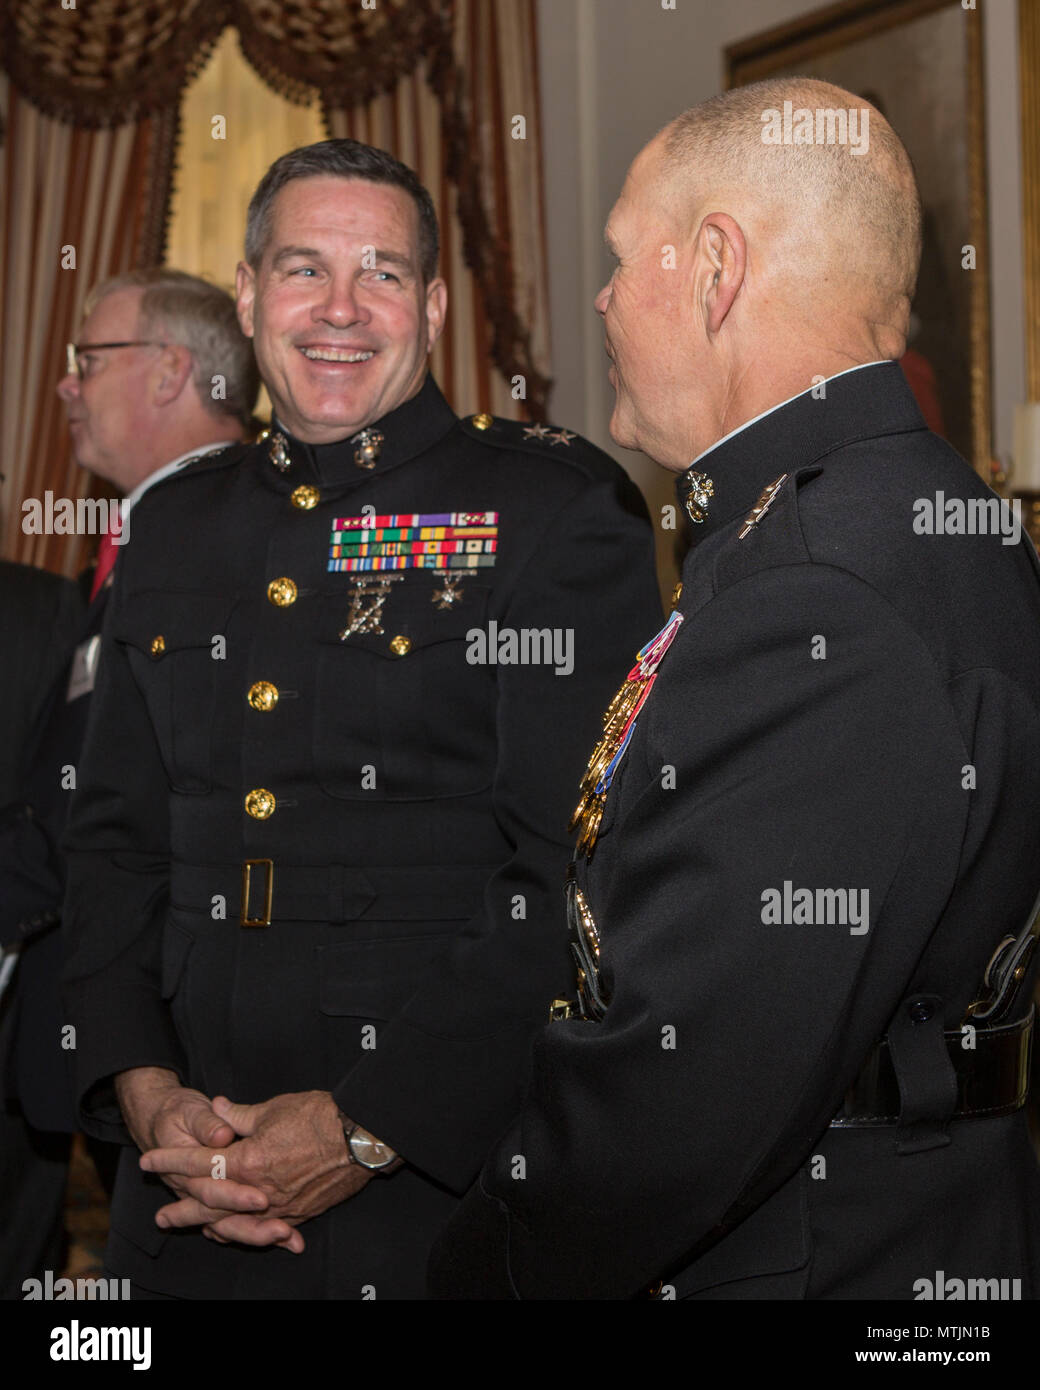 Commandant of the Marine Corps Gen. Robert B. Neller, right, speaks with Maj. Gen. John R. Ewers, Jr., staff judge advocate to the Commandant, before the 2017 Surprise Serenade at the Home of the Commandants, Washington, D.C., Jan. 1, 2017. The Surprise Serenade is a tradition that dates back to the mid-1800’s in which the U.S. Marine Band performs music for the Commandant of the Marine Corps at his home on New Years Day. (U.S. Marine Corps photo by Cpl. Samantha K. Braun) Stock Photo